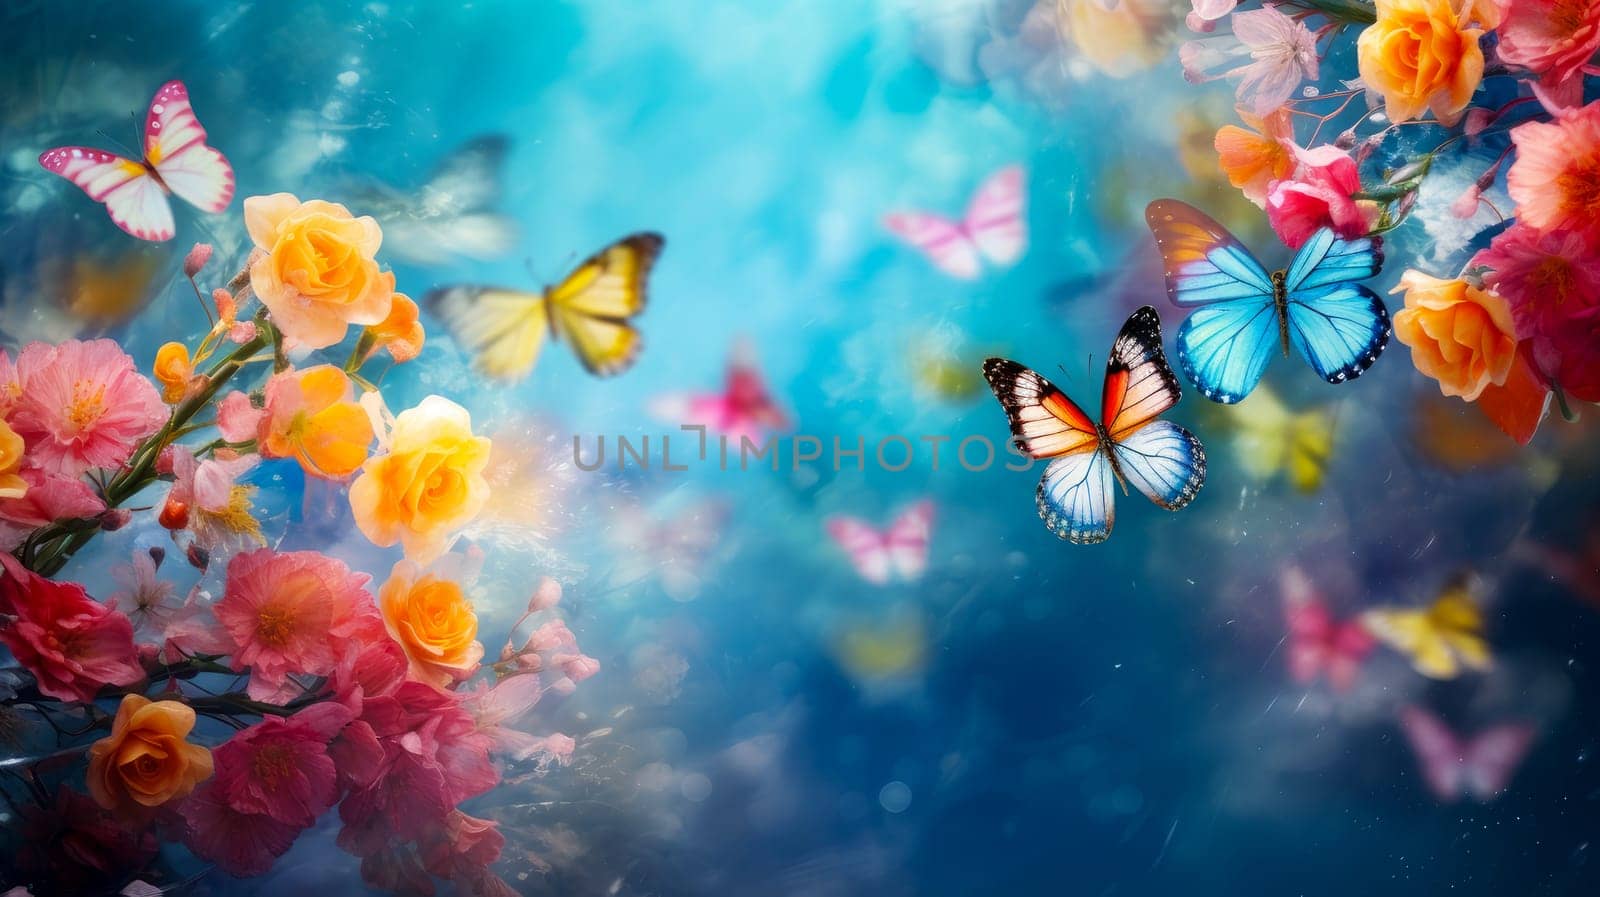 Abstract natural spring background with butterflies and light colorful colorful dark meadow flowers closeup. Colorful artistic image with soft focus and beautiful bokeh in summer spring